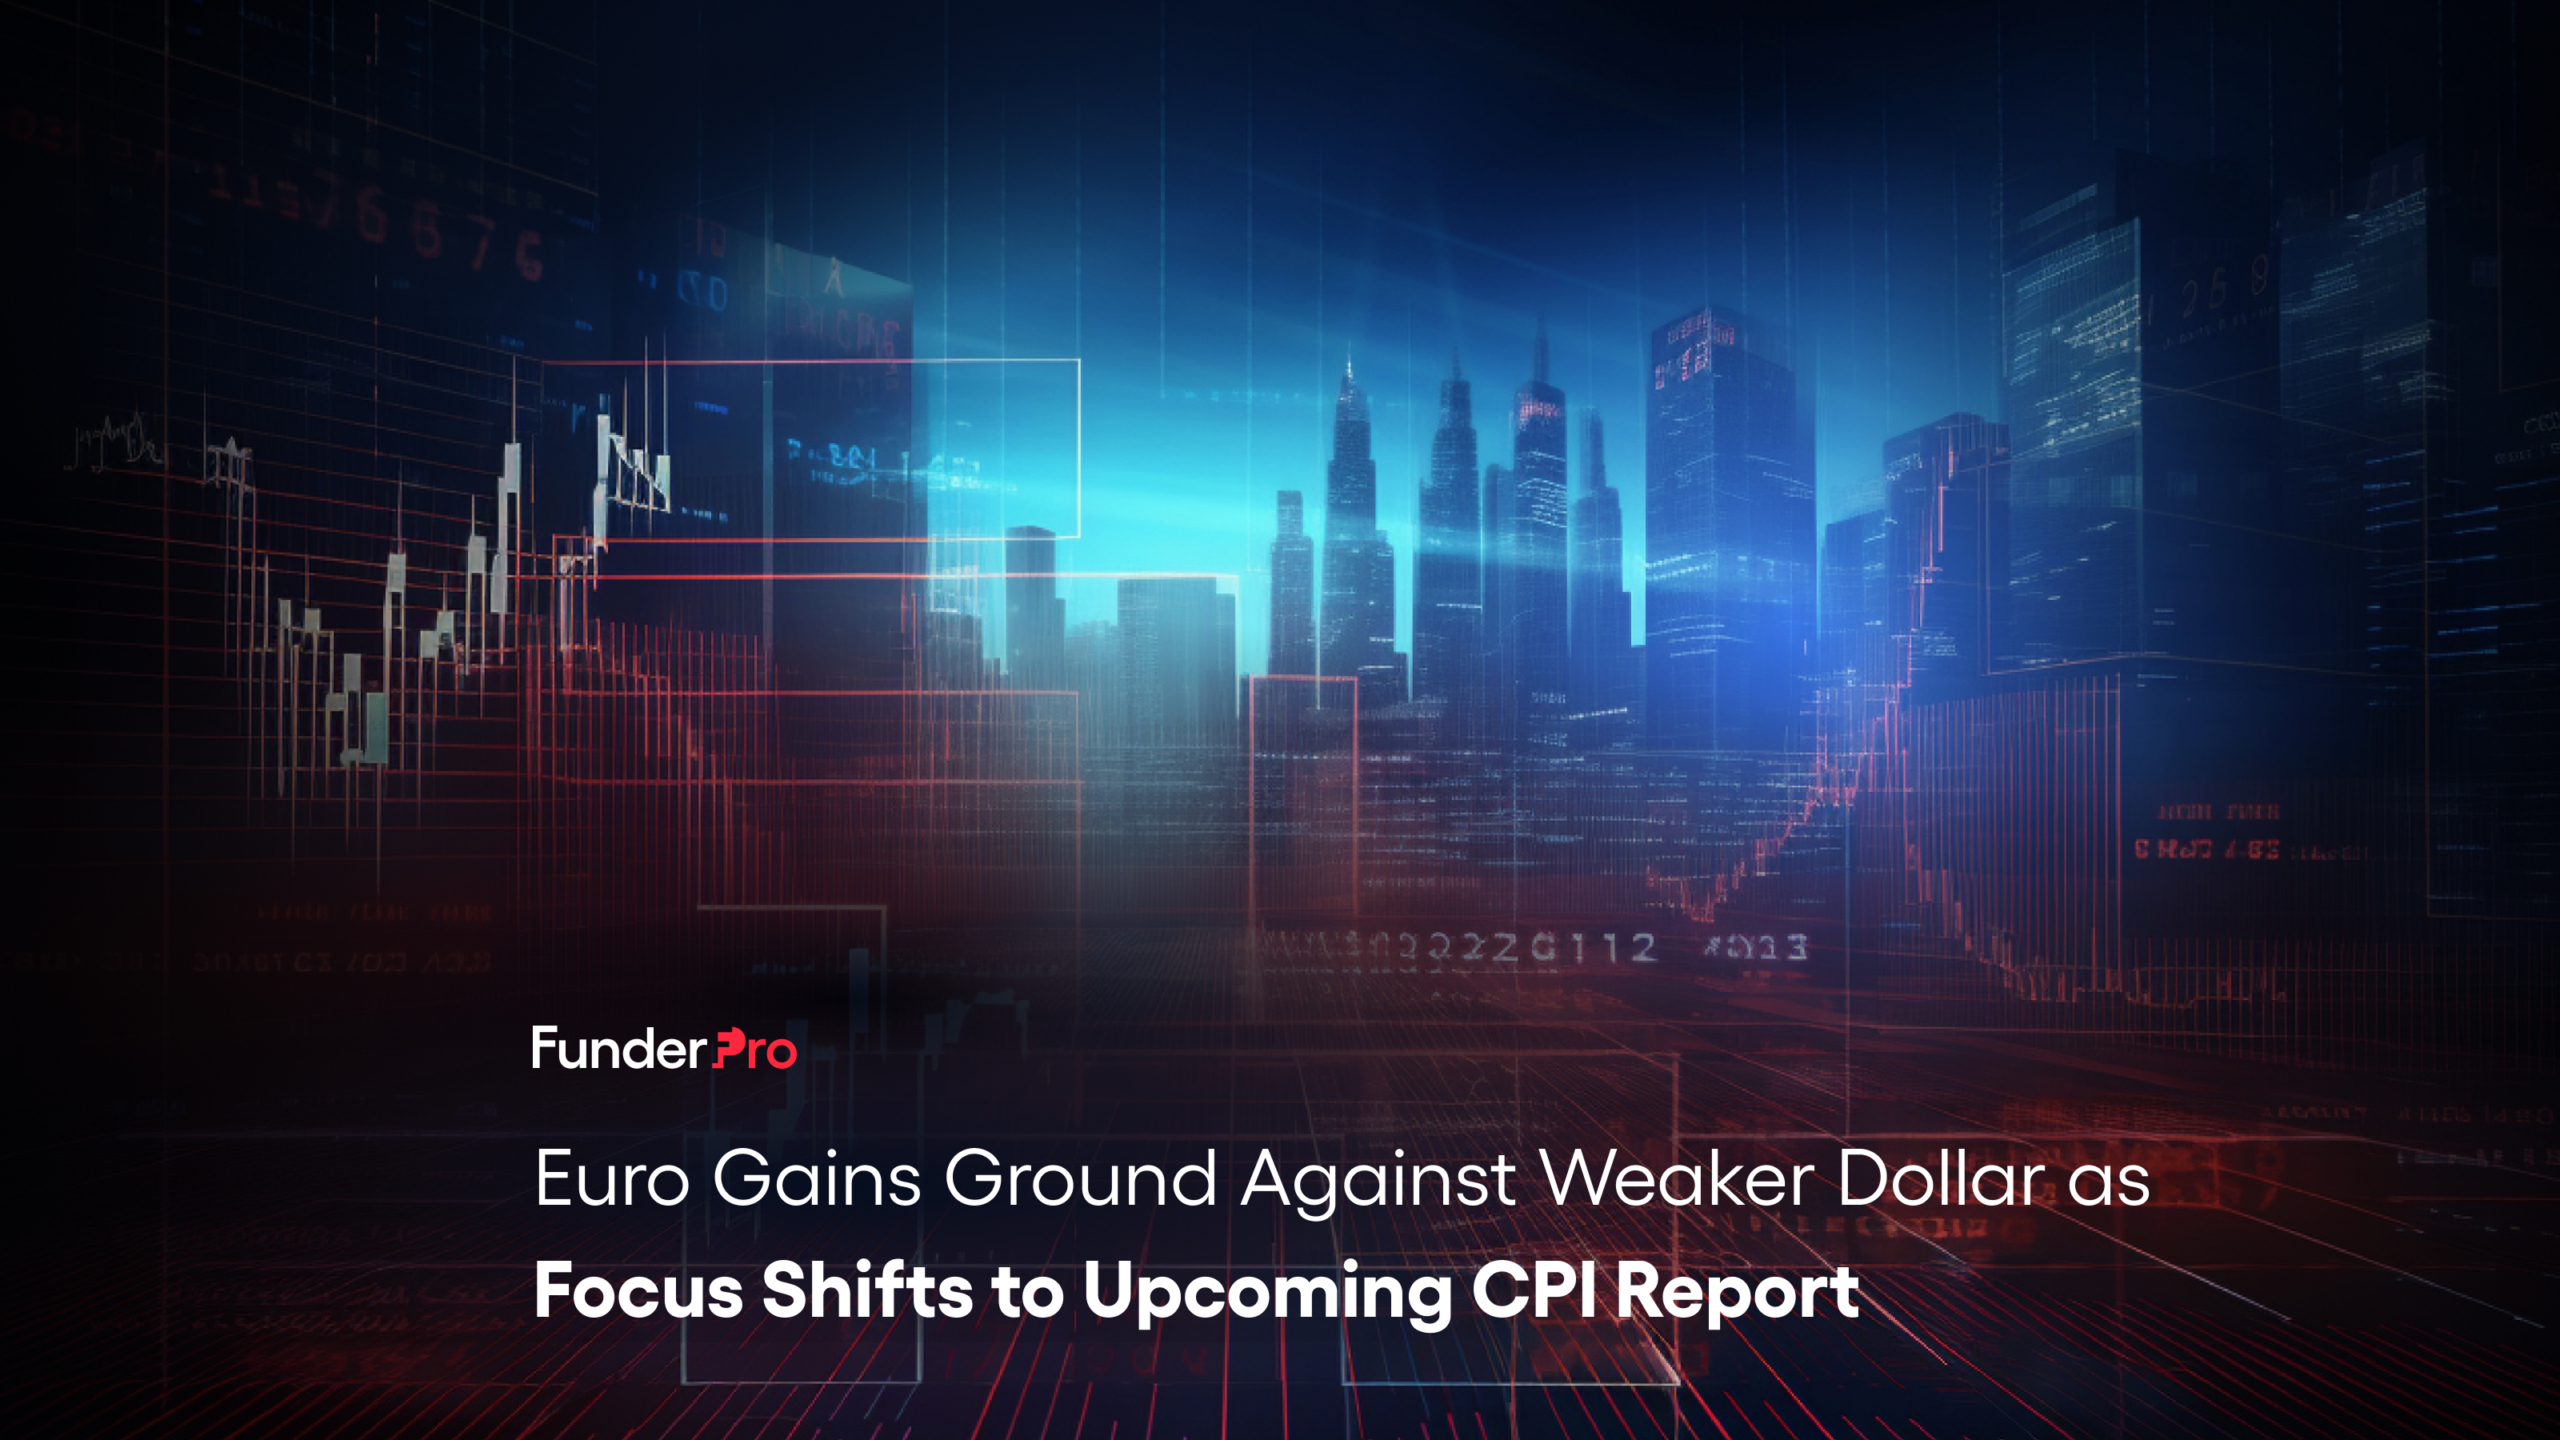 Euro Gains Ground Against Weaker Dollar as Focus Shifts to Upcoming CPI Report